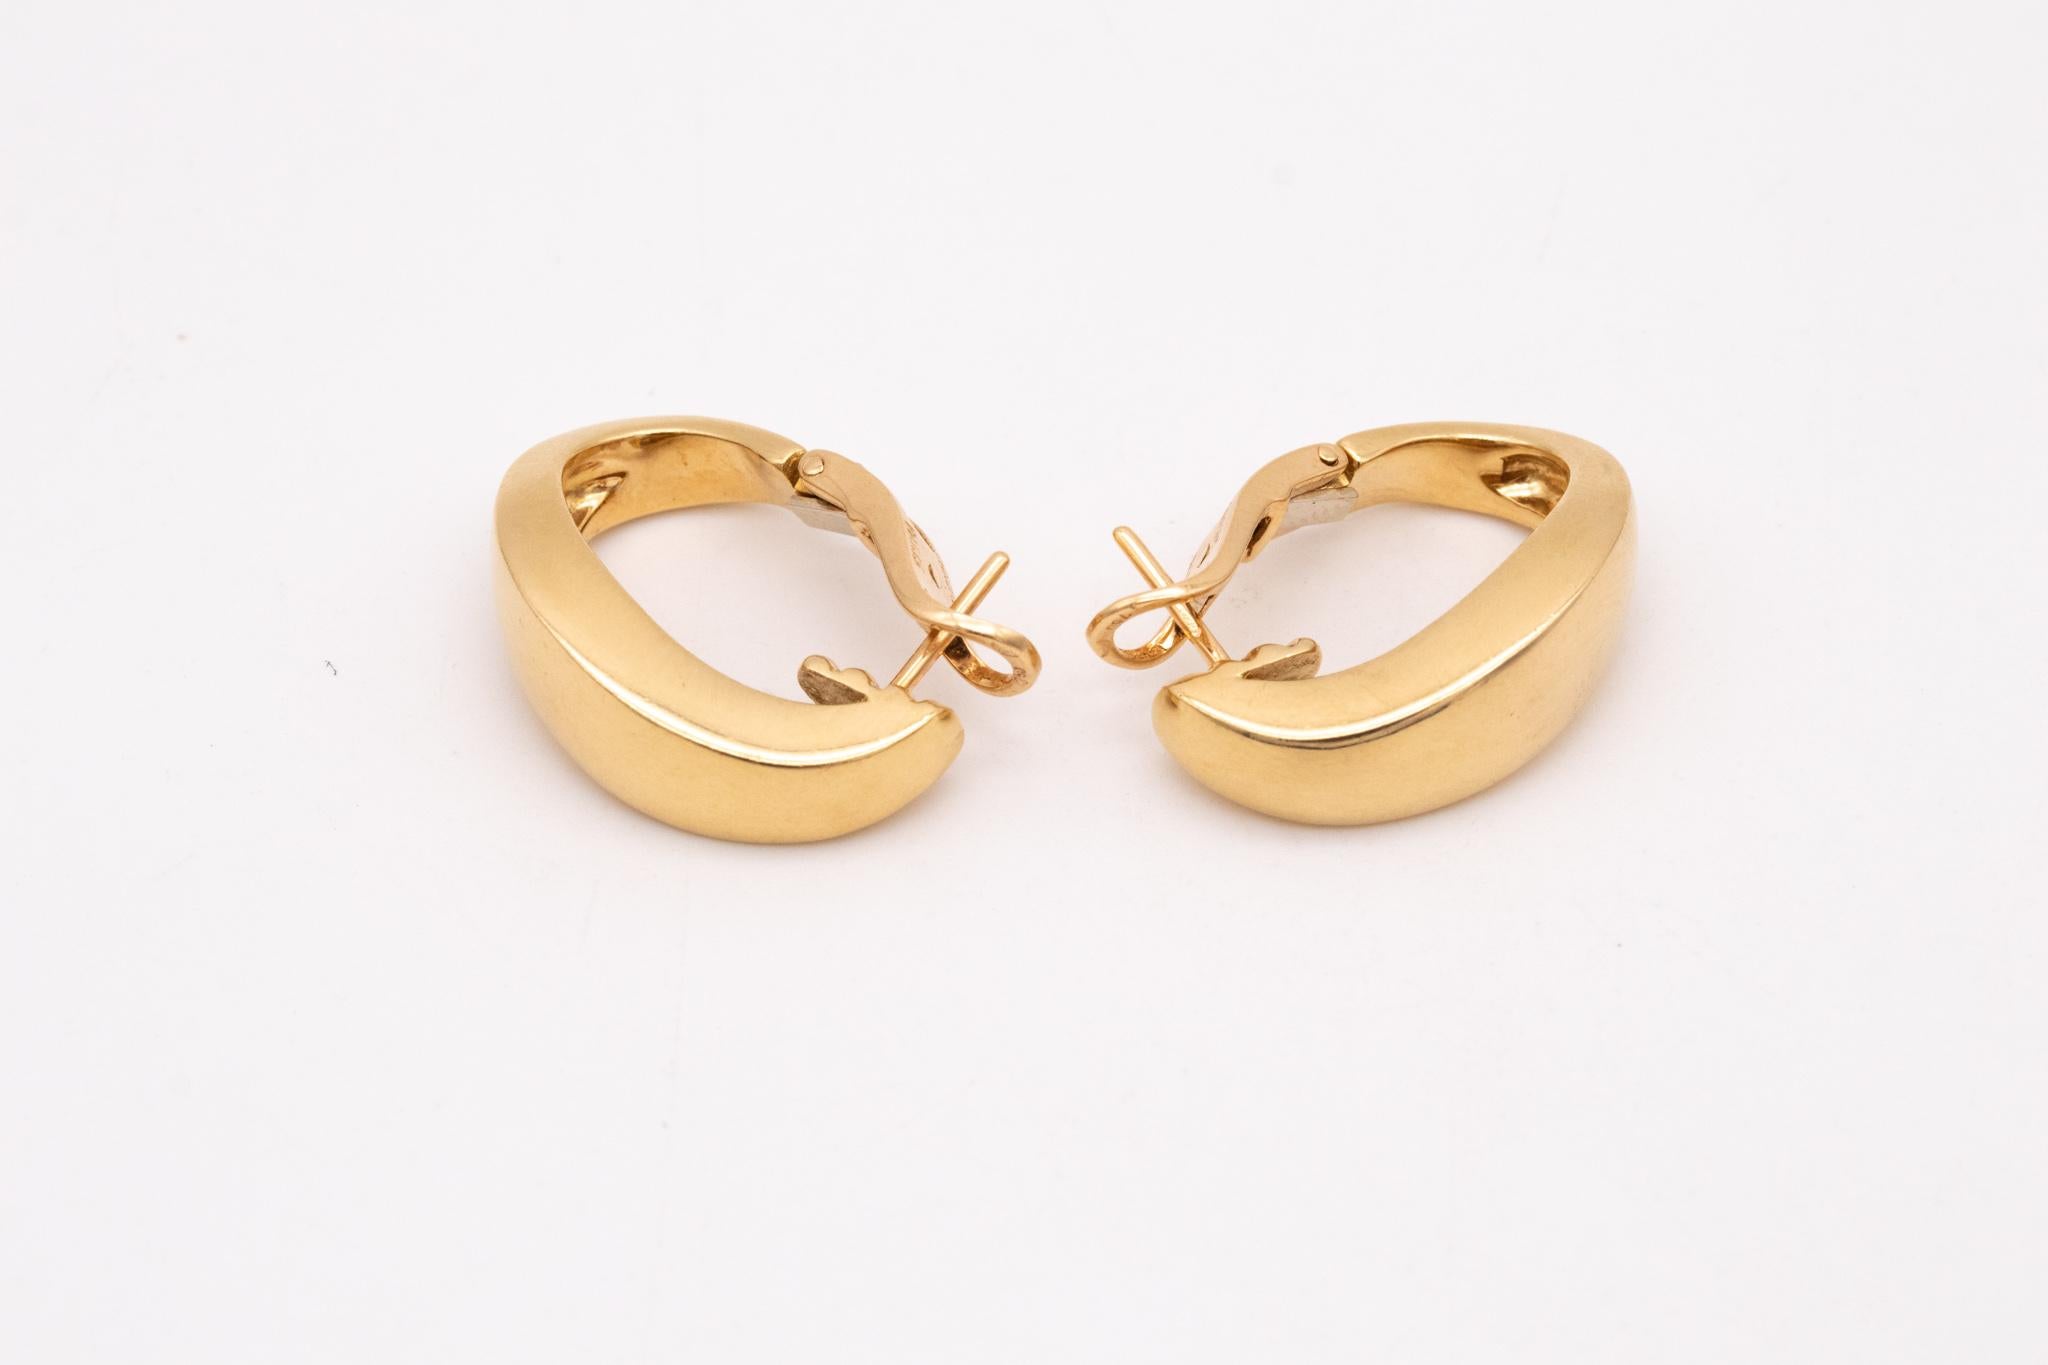 Chaumet Paris Modernist Hoop Clip-On Earrings in Solid 18Kt Yellow Gold 1